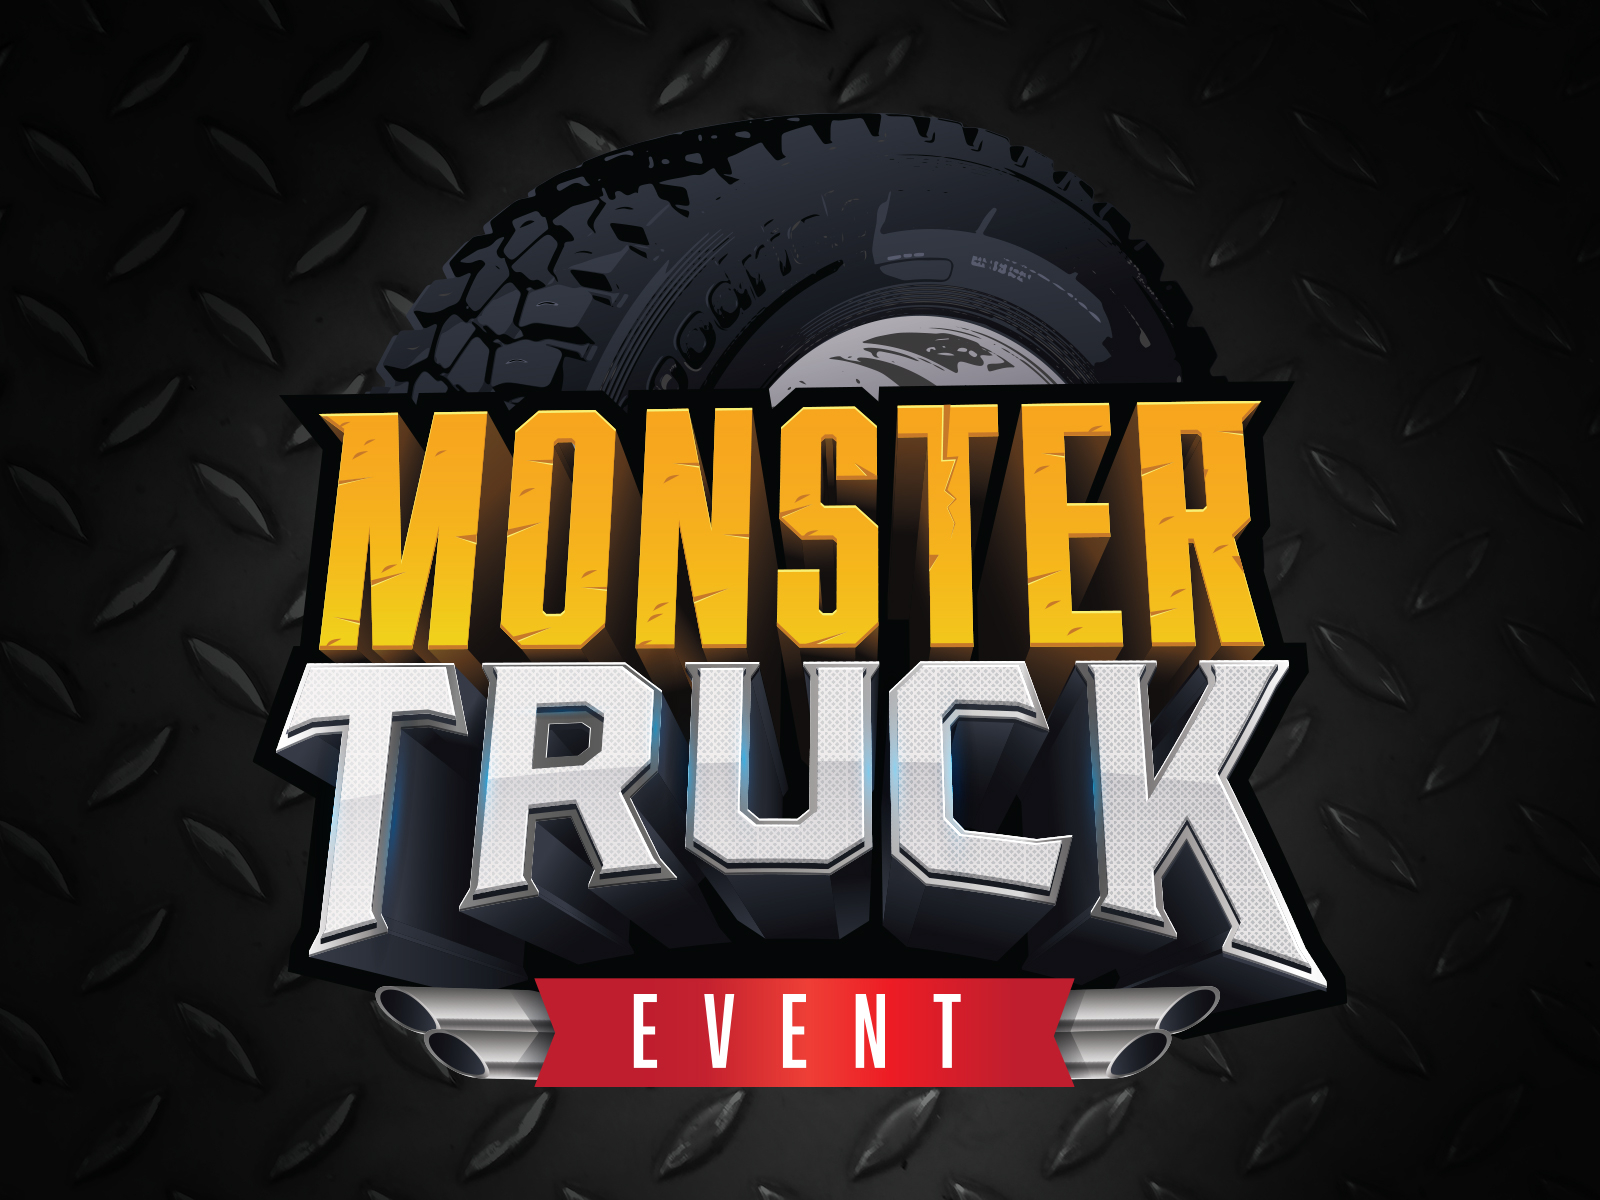 Logo needed for monster truck  channel and merchandise, concurso  Design de logotipos